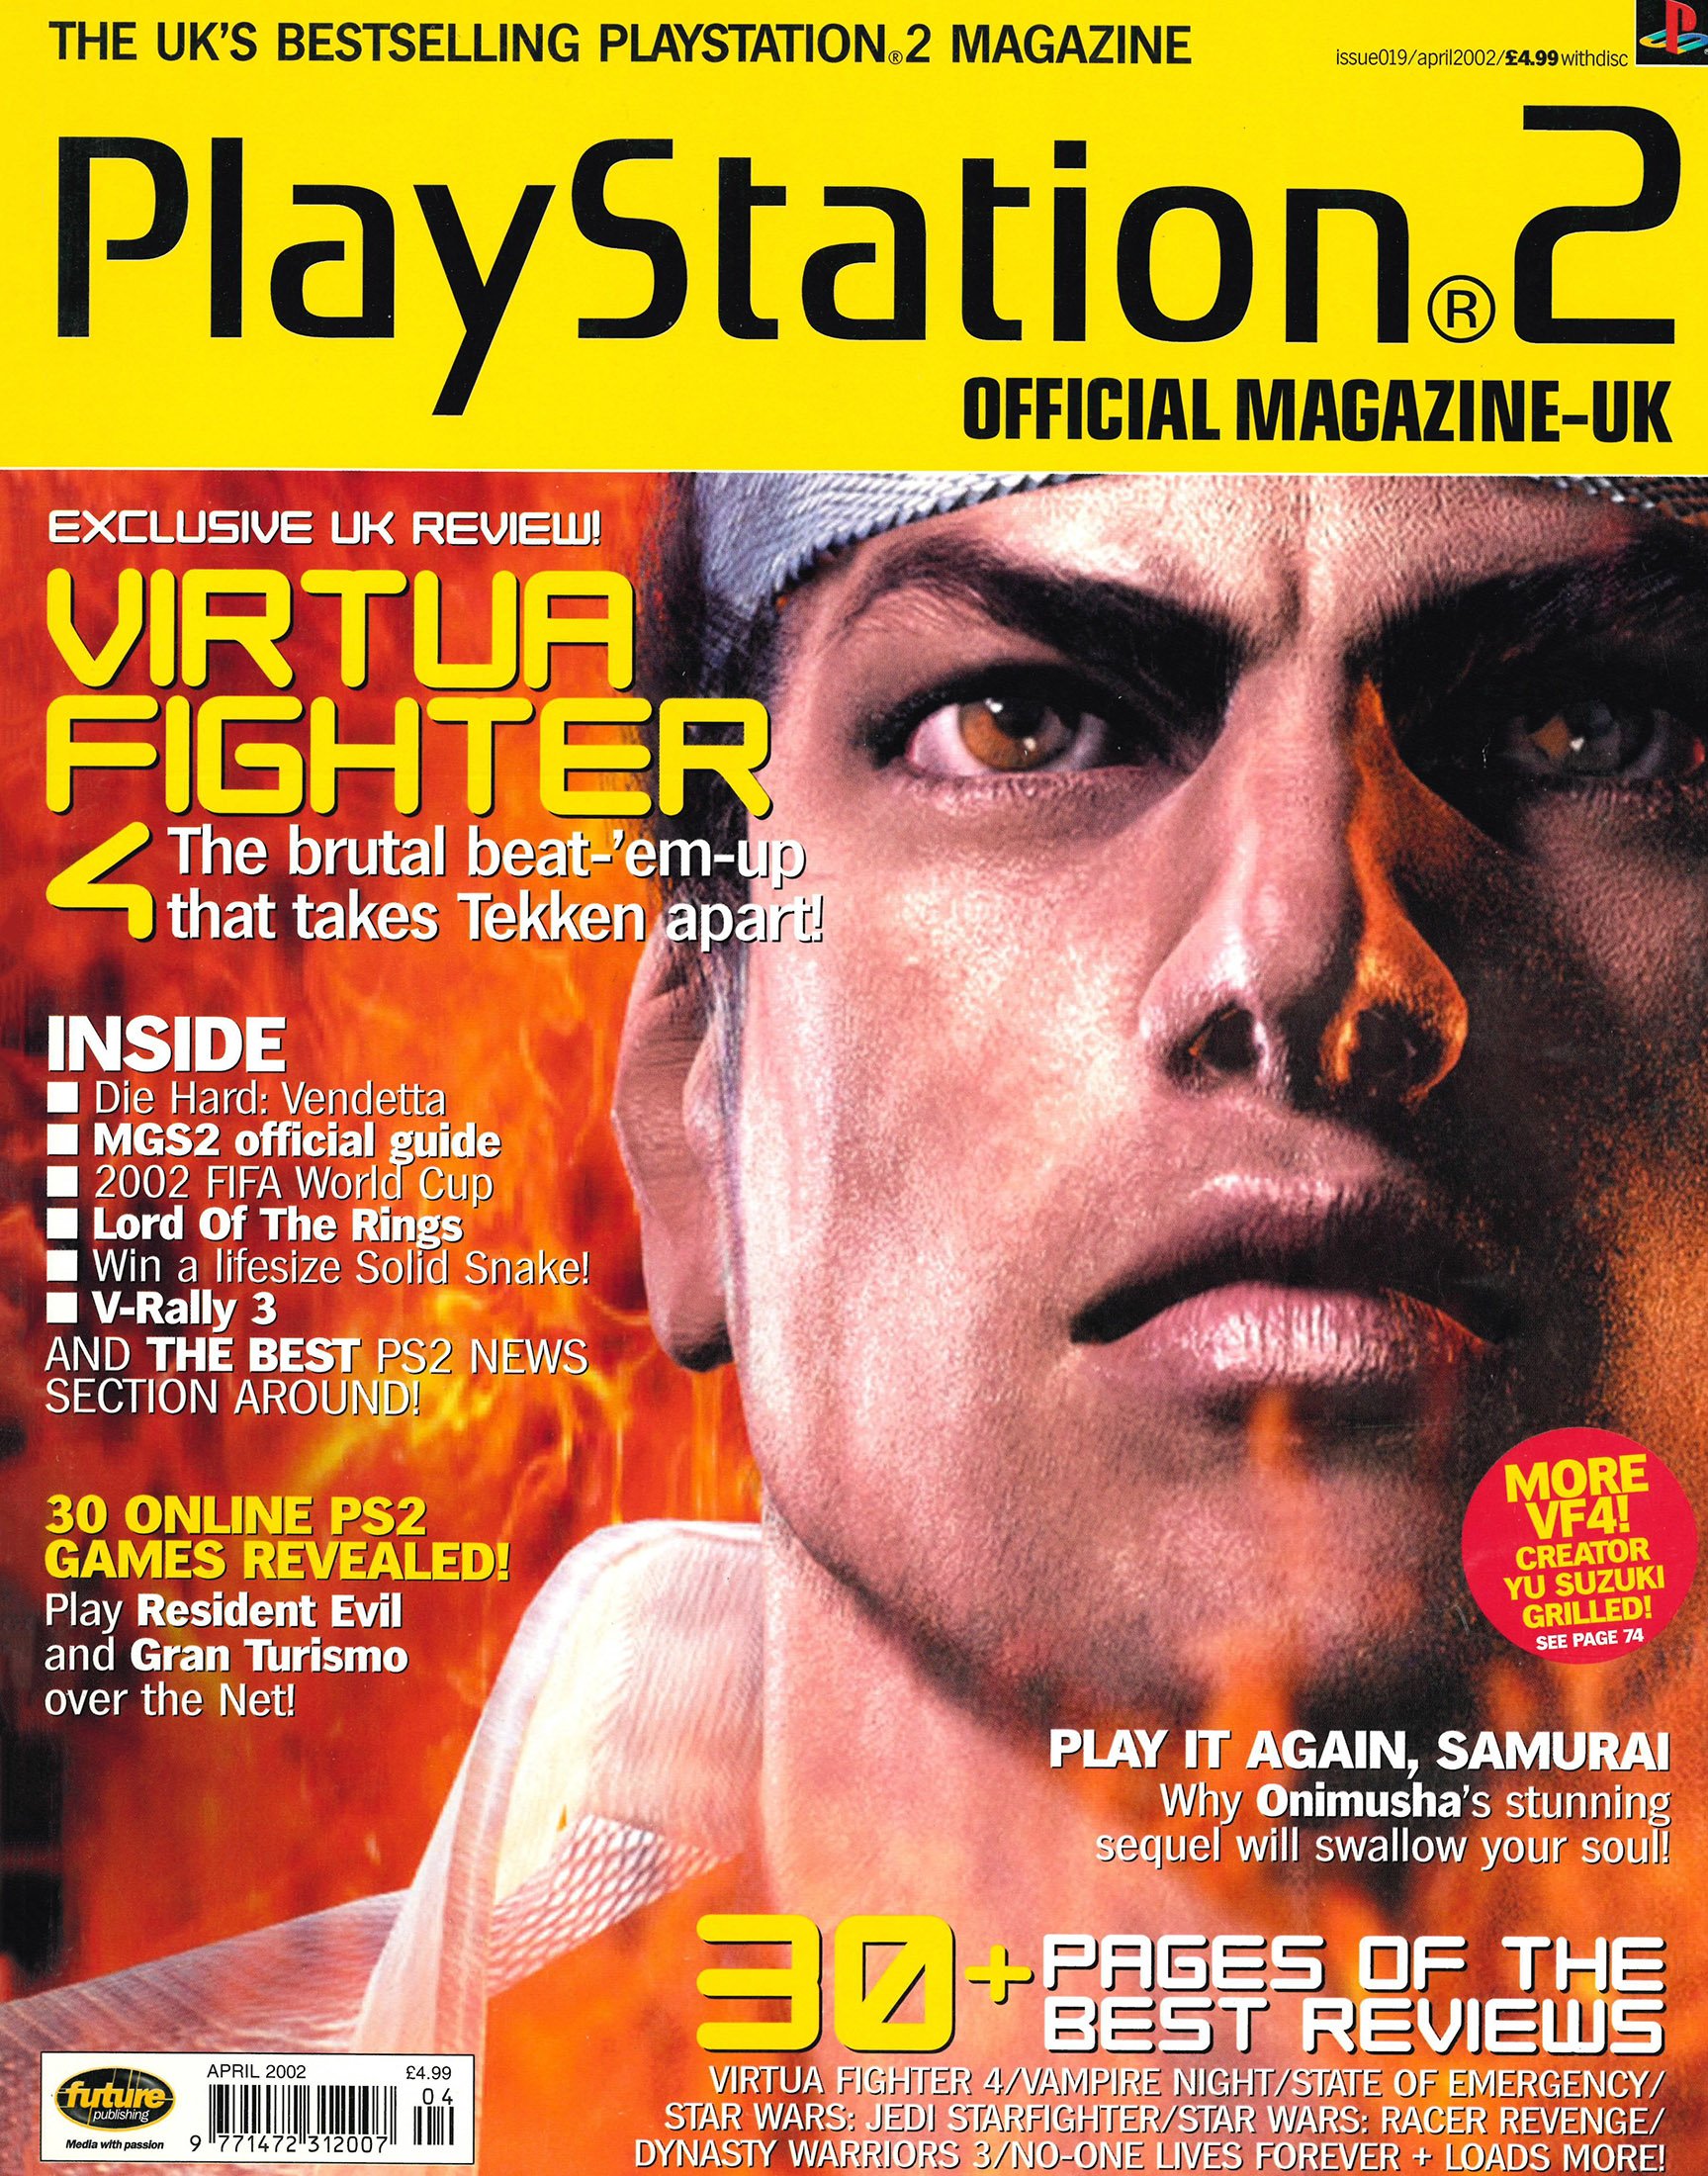 Magazine 2 4. Ps2 Official Magazine. Official PLAYSTATION Magazine uk. Die hard Vendetta ps2. Last Issue of Official PLAYSTATION Magazine.